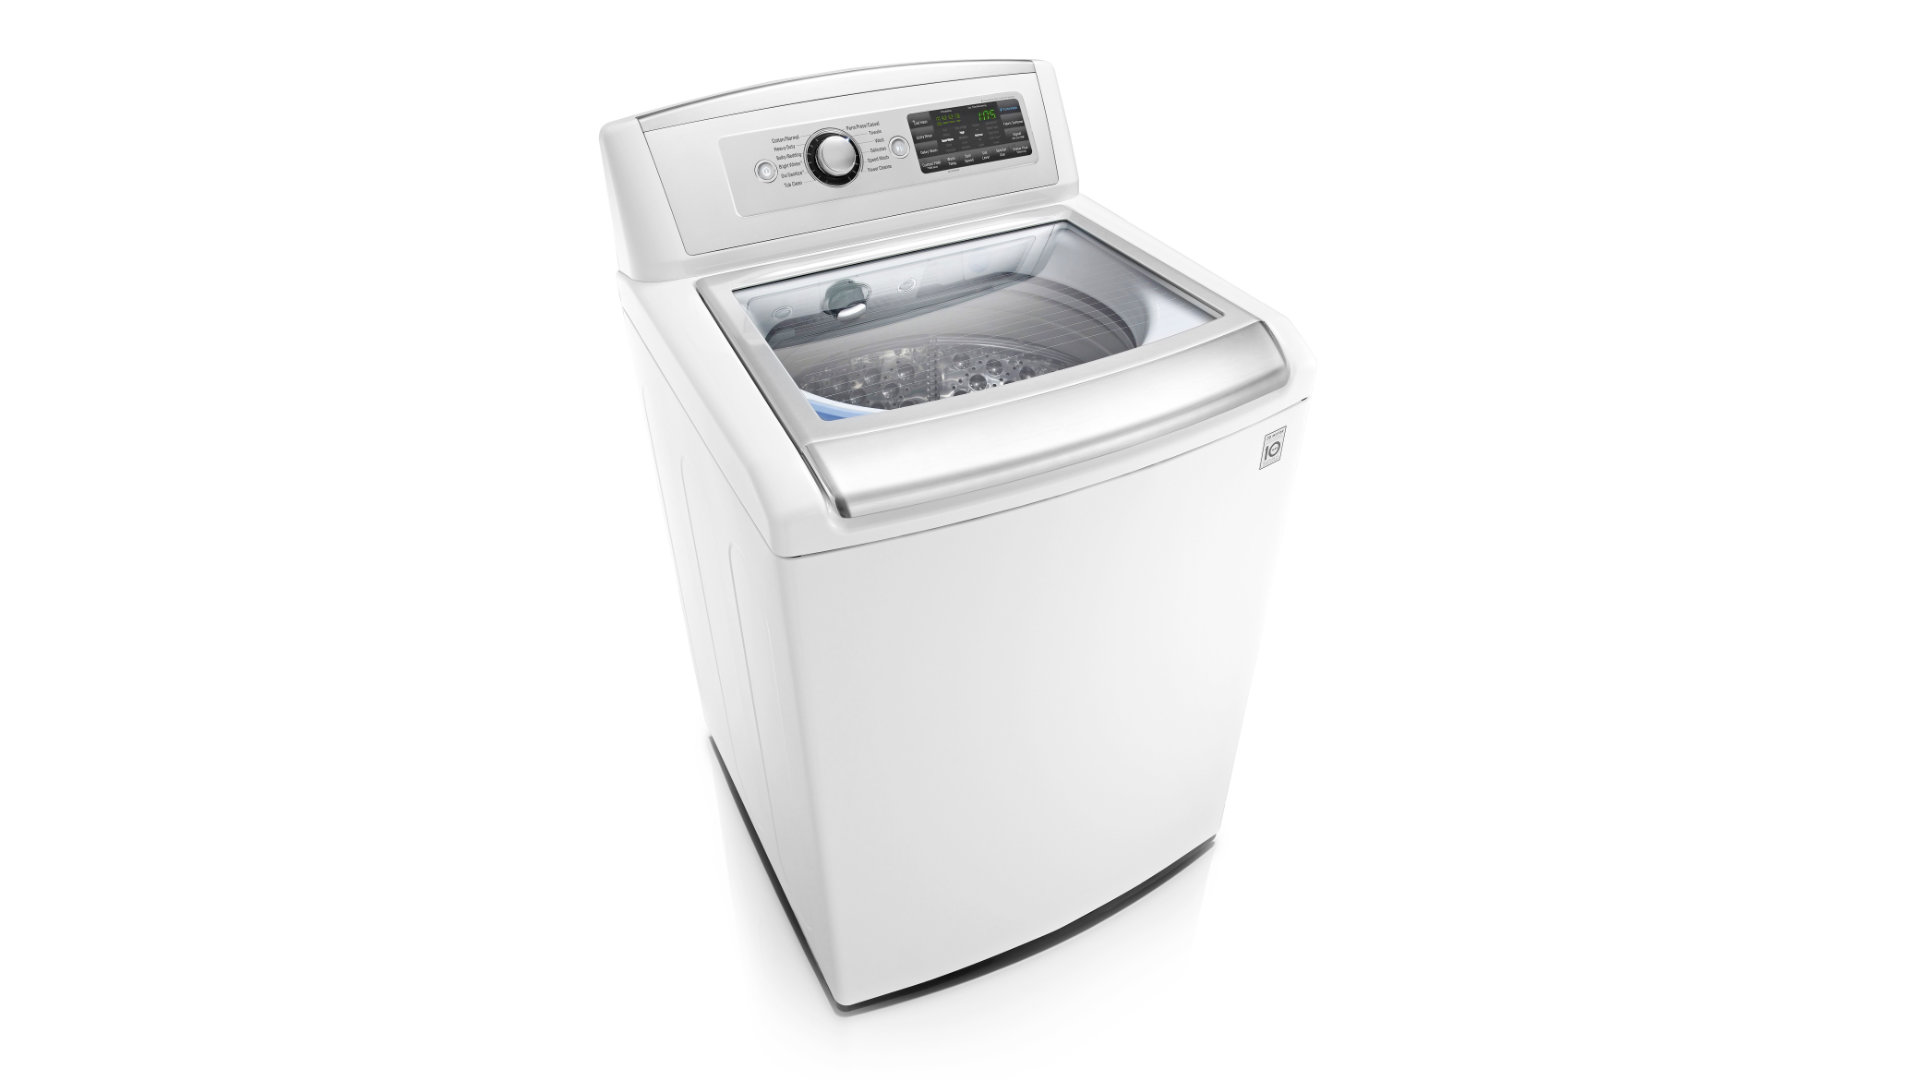 LG Washing Machine Error Codes: A Complete Guide